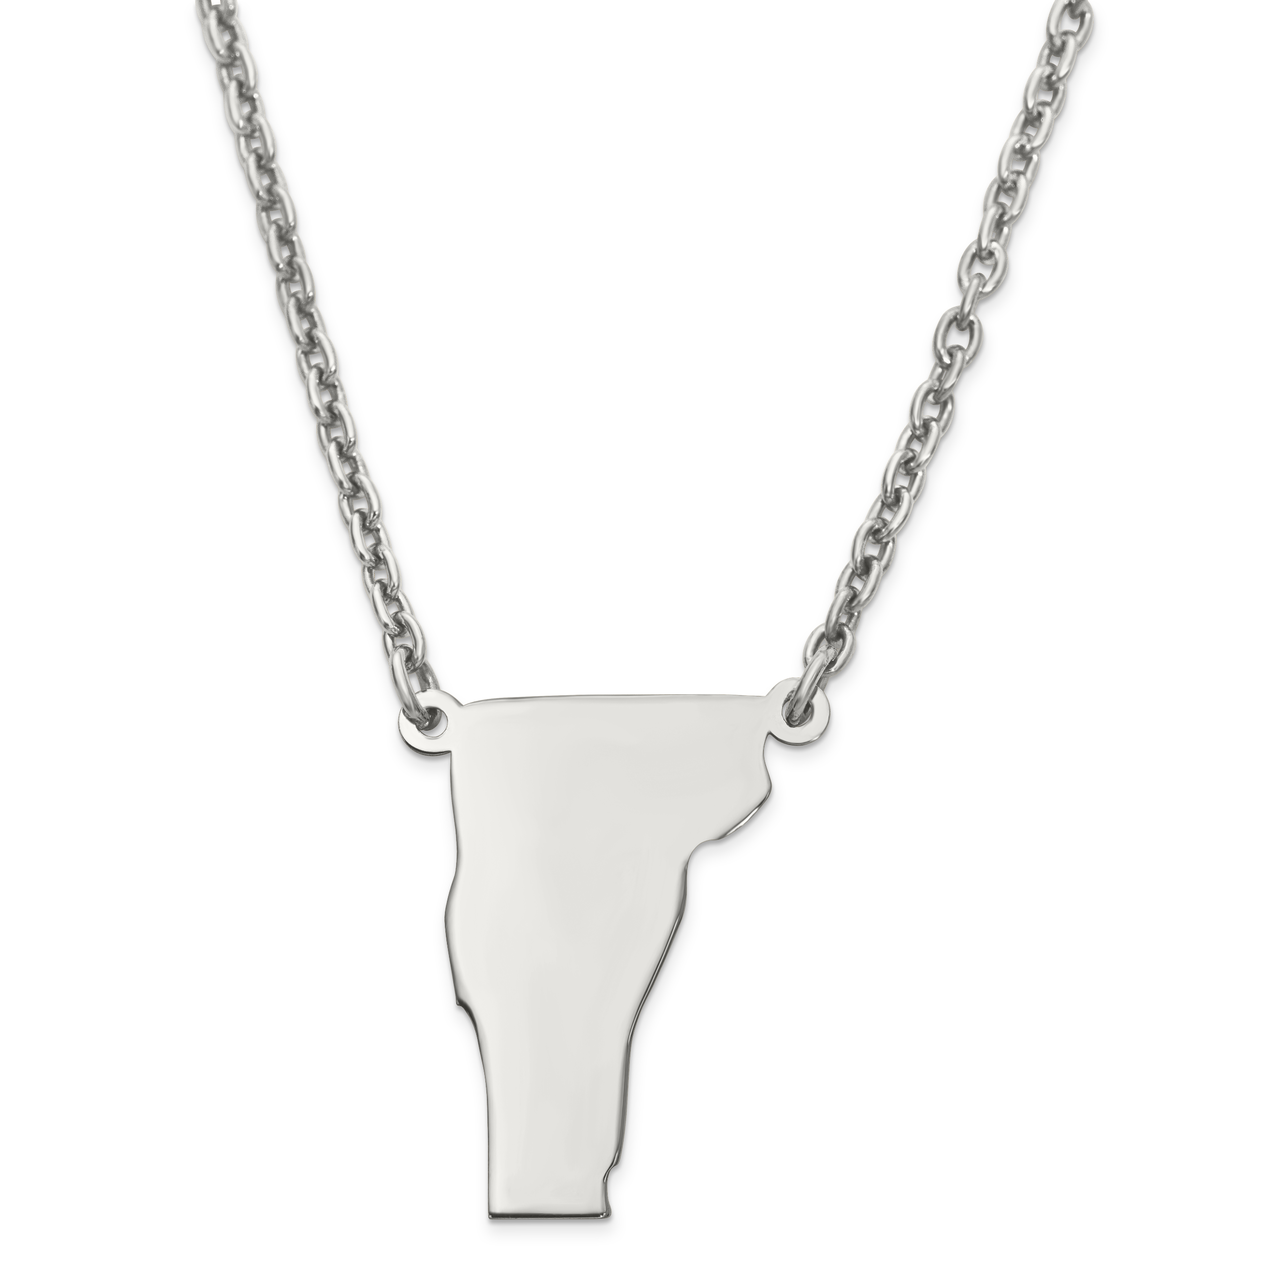 Vermont State Pendant Necklace with Chain Sterling Silver Engravable XNA706SS-VT